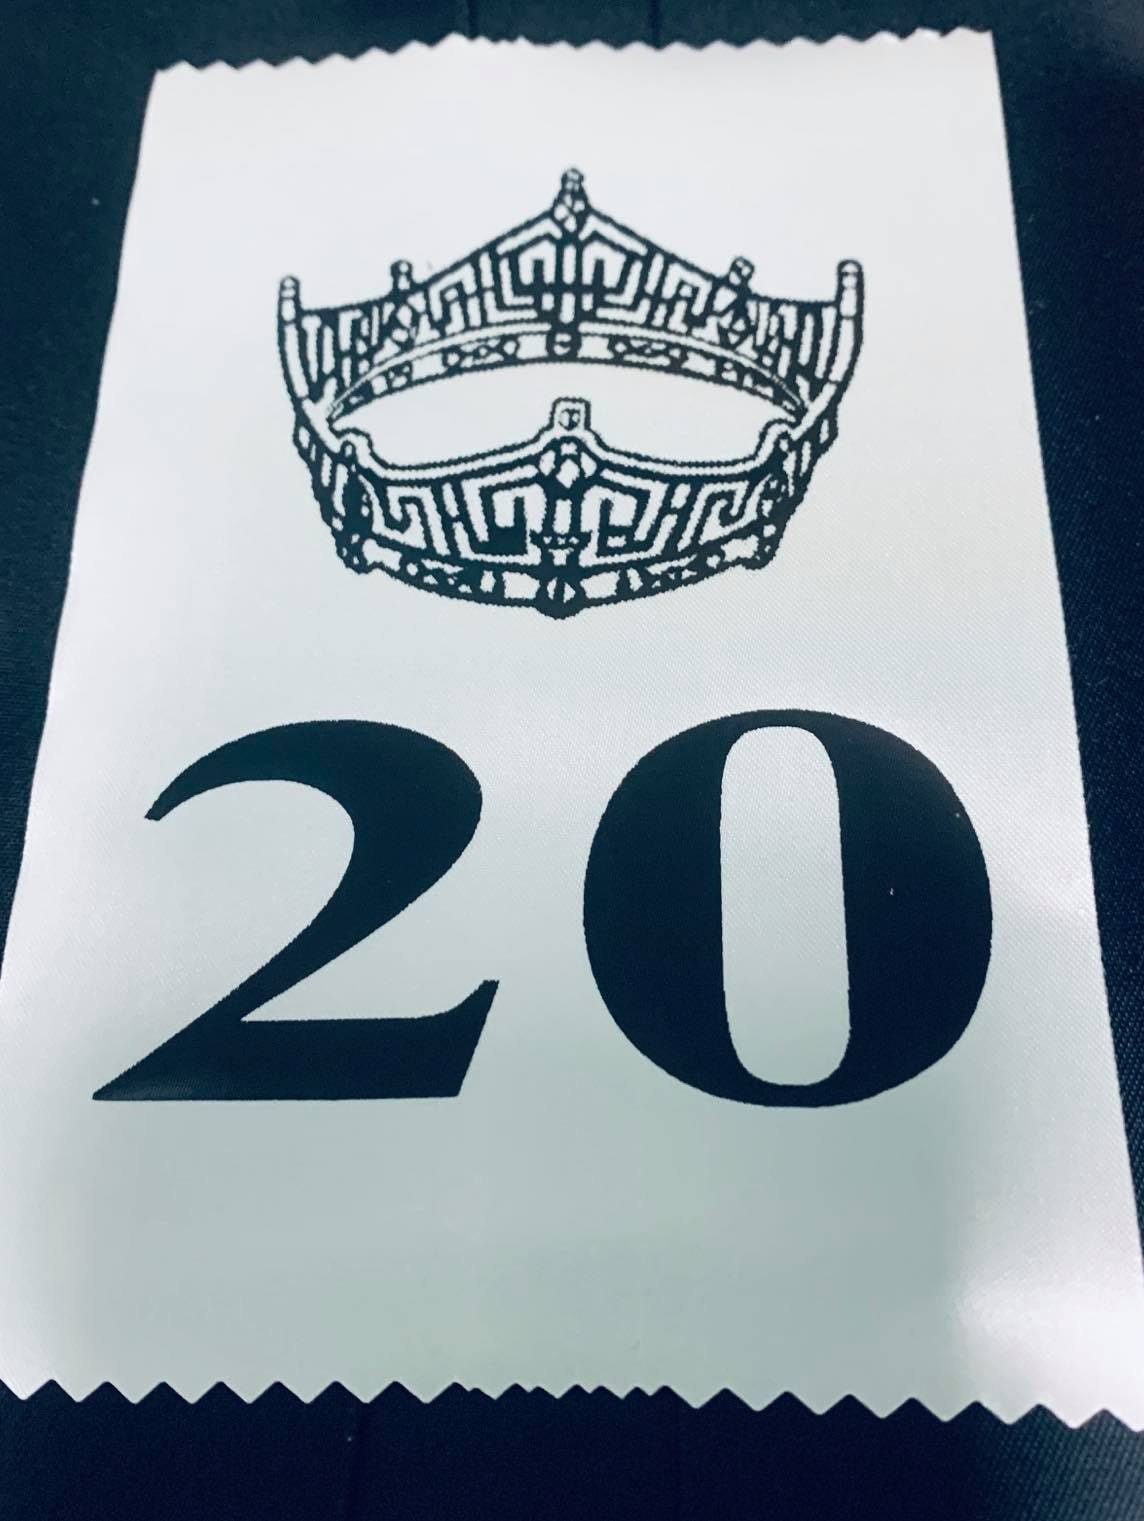 Silver Glitter Number Stickers Self Adhesive Peel off Numbers 0 to 9 2  Sparkly Lightweight Birthday Stickers Milestone Age and Date 